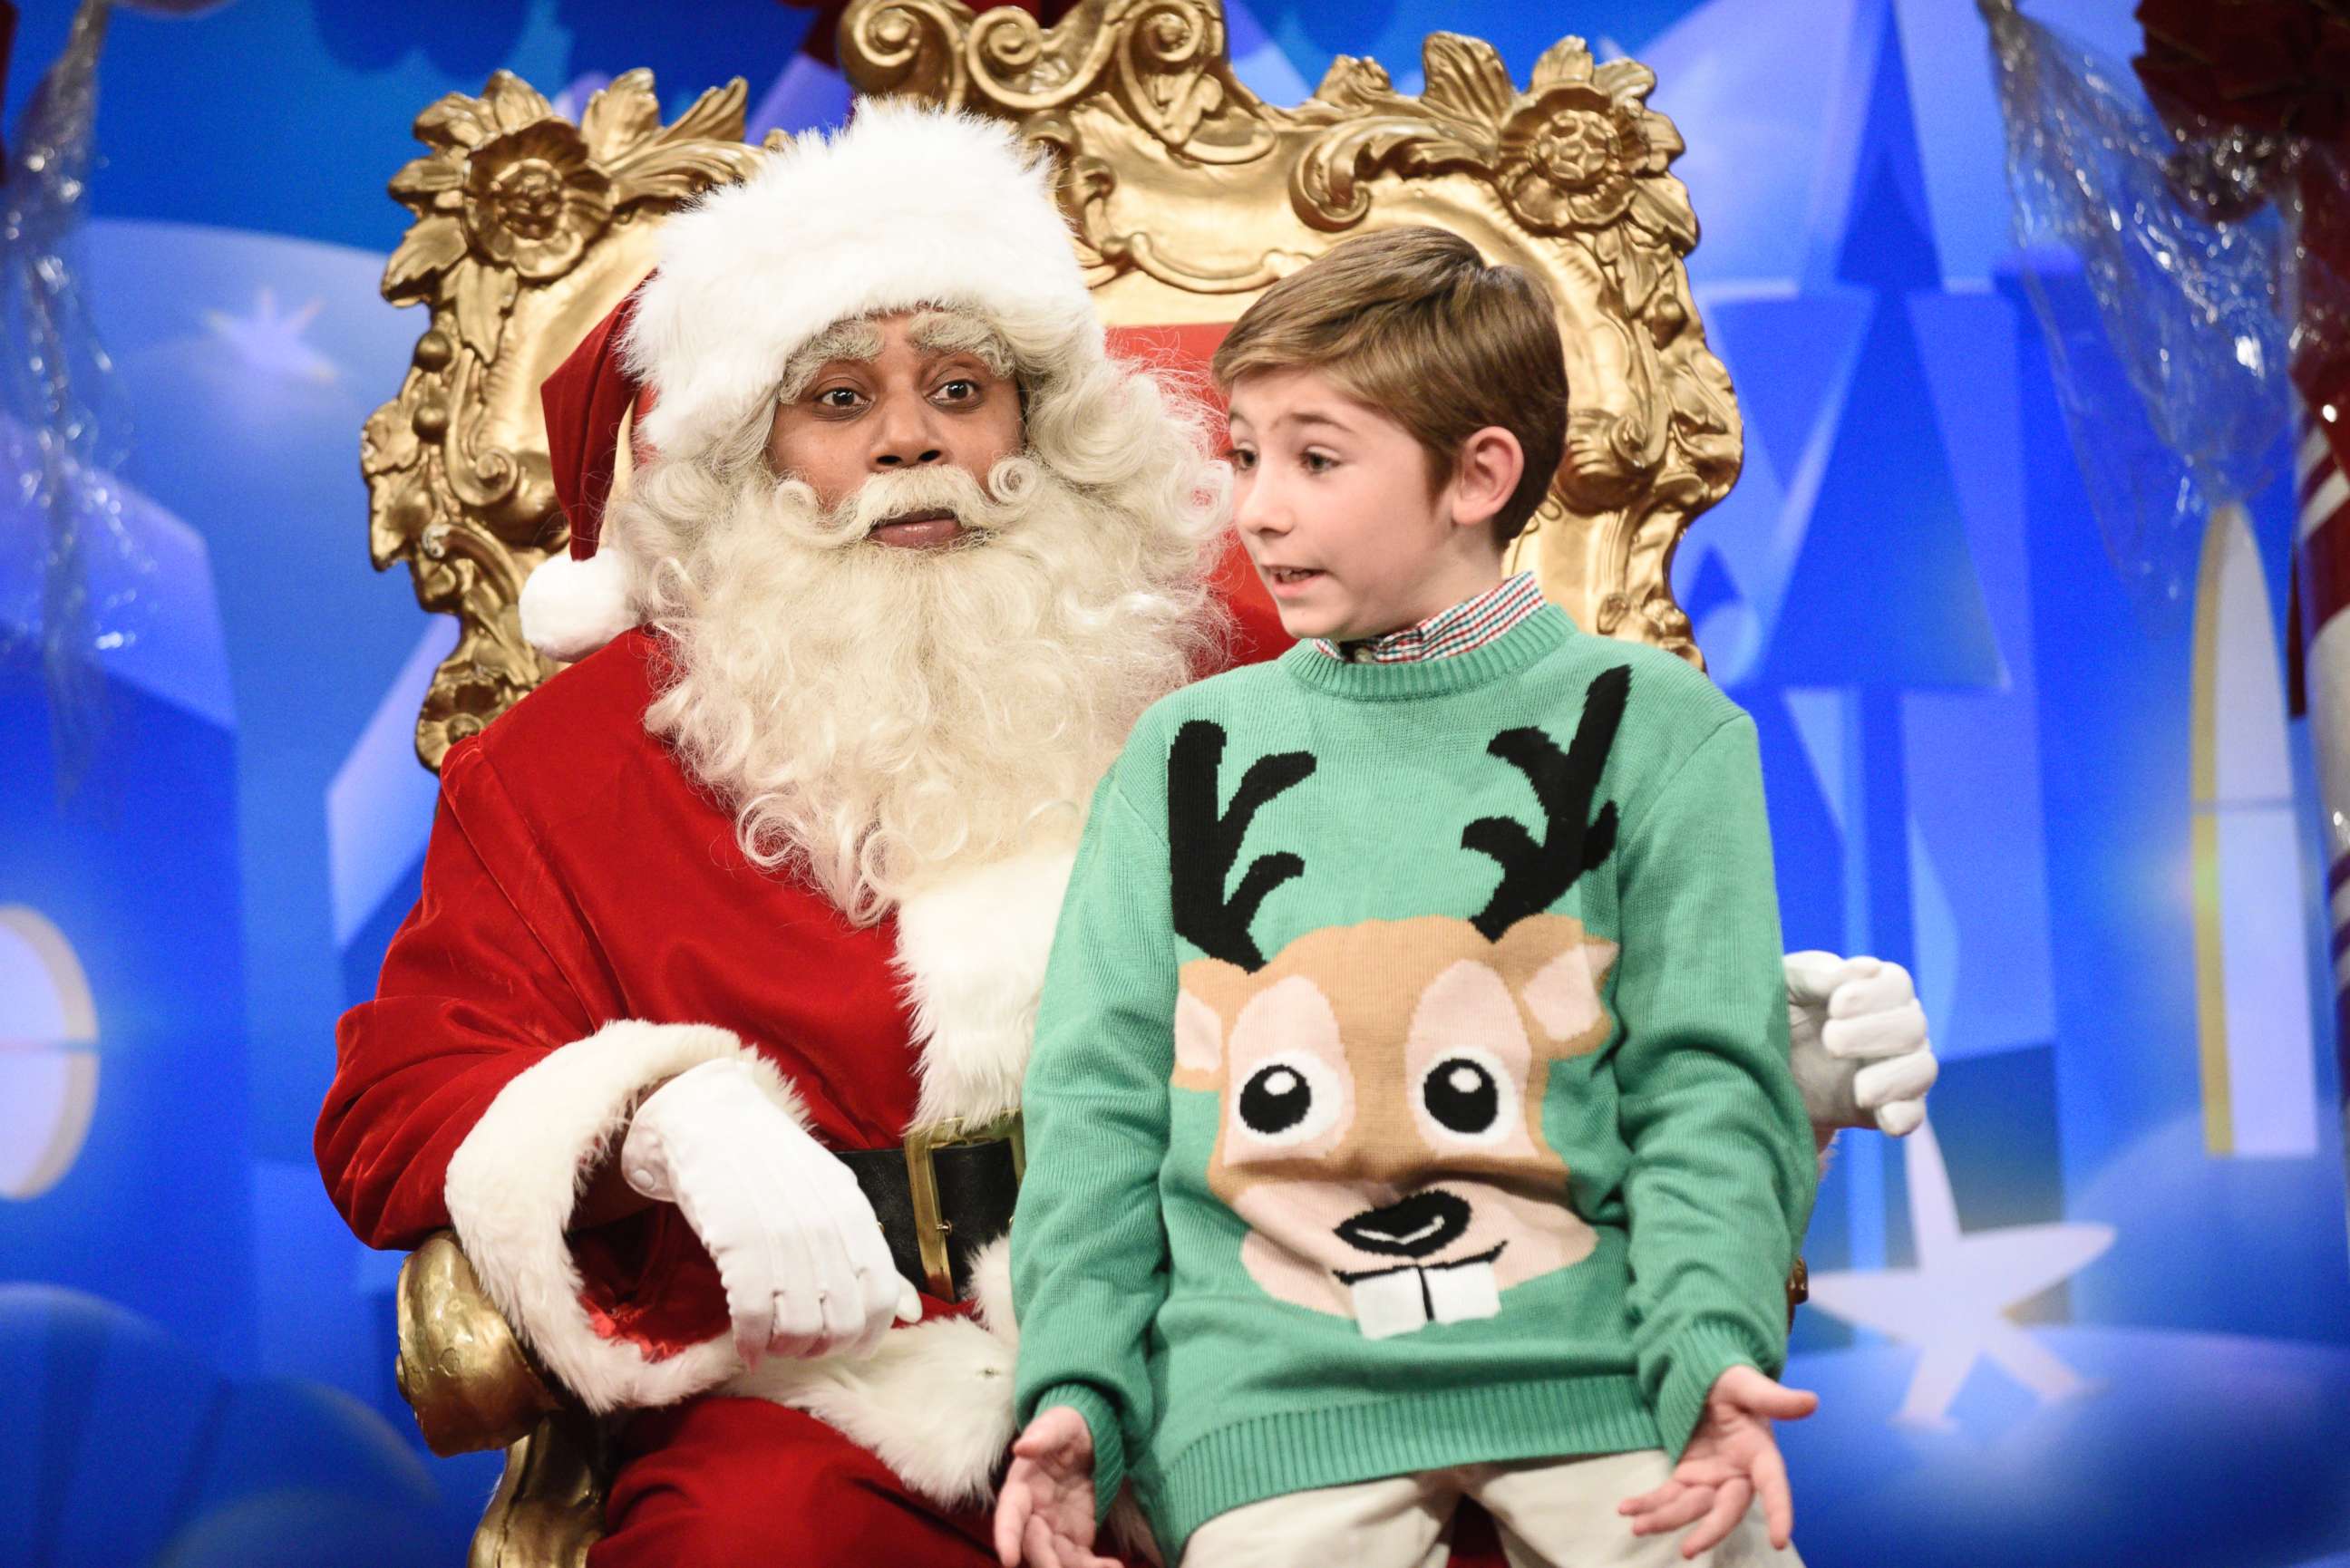 PHOTO: SATURDAY NIGHT LIVE -- Episode 1733 -- Pictured: Kenan Thompson as Santa during "Visit with Santa Cold Open" on Saturday, December 9, 2017  